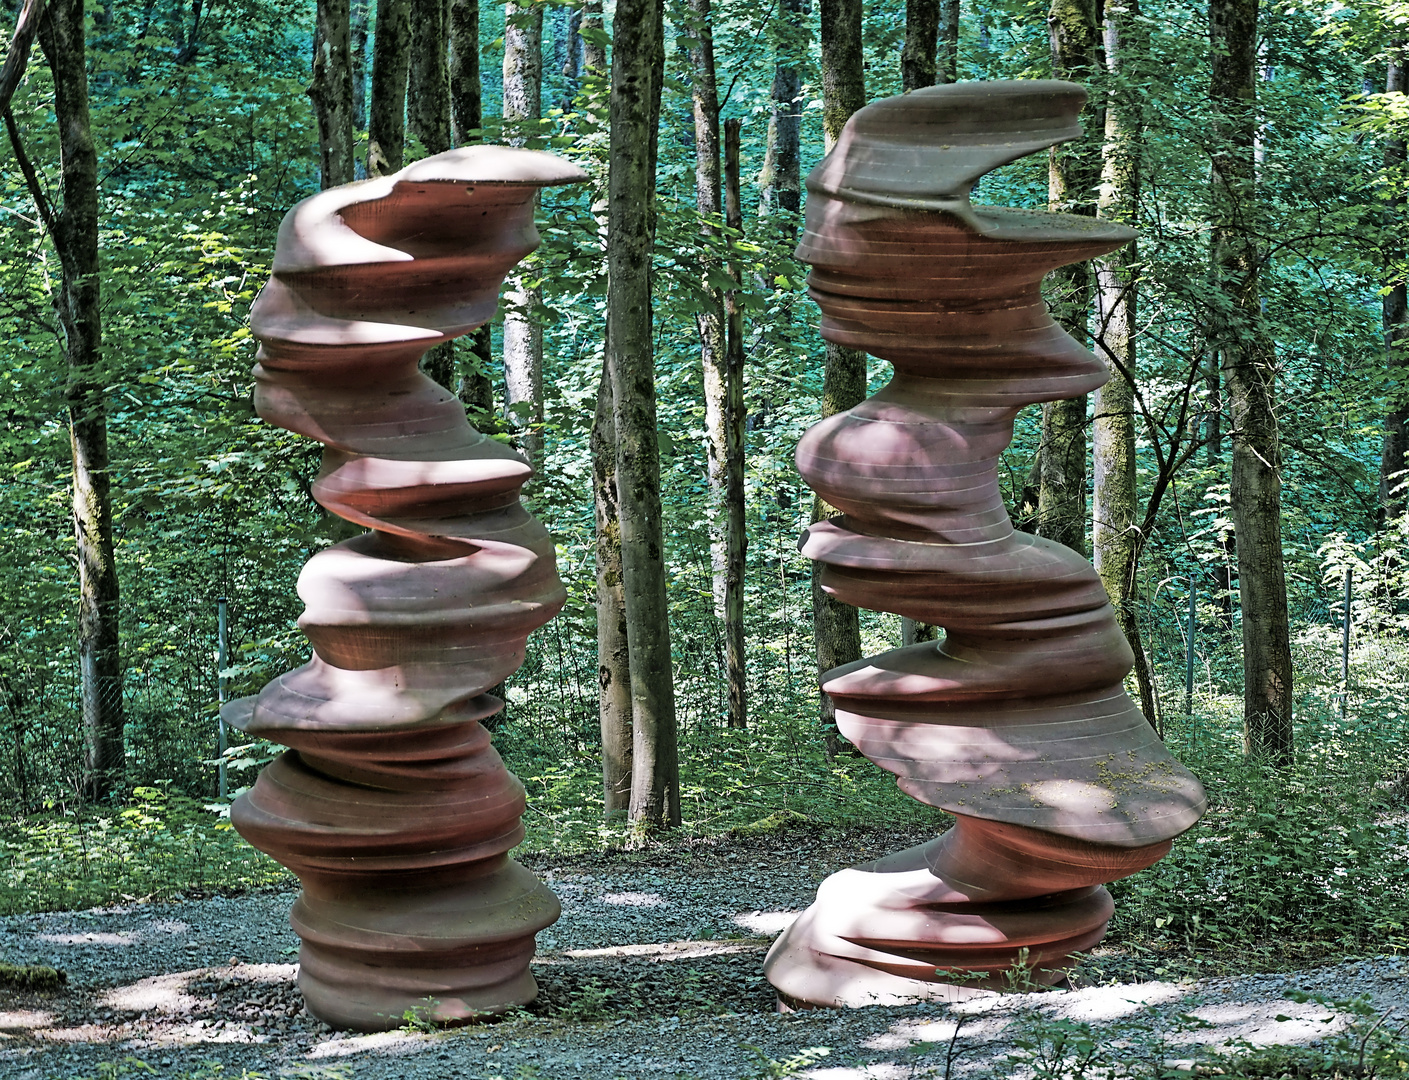 Tony Cragg - Here Today gone Tomorrow